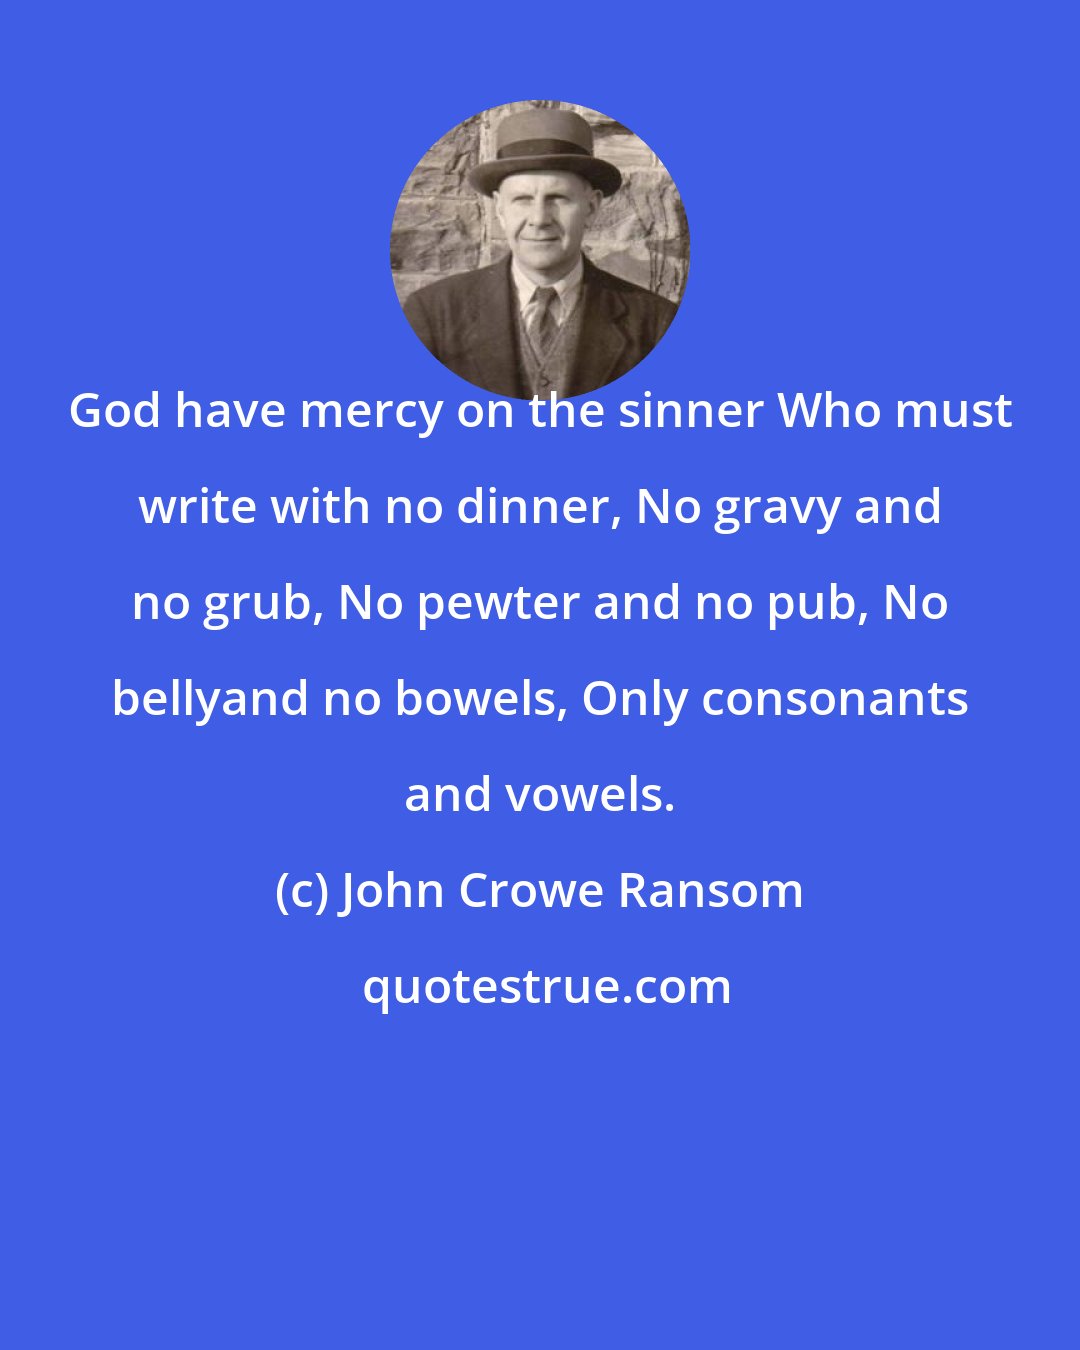 John Crowe Ransom: God have mercy on the sinner Who must write with no dinner, No gravy and no grub, No pewter and no pub, No bellyand no bowels, Only consonants and vowels.